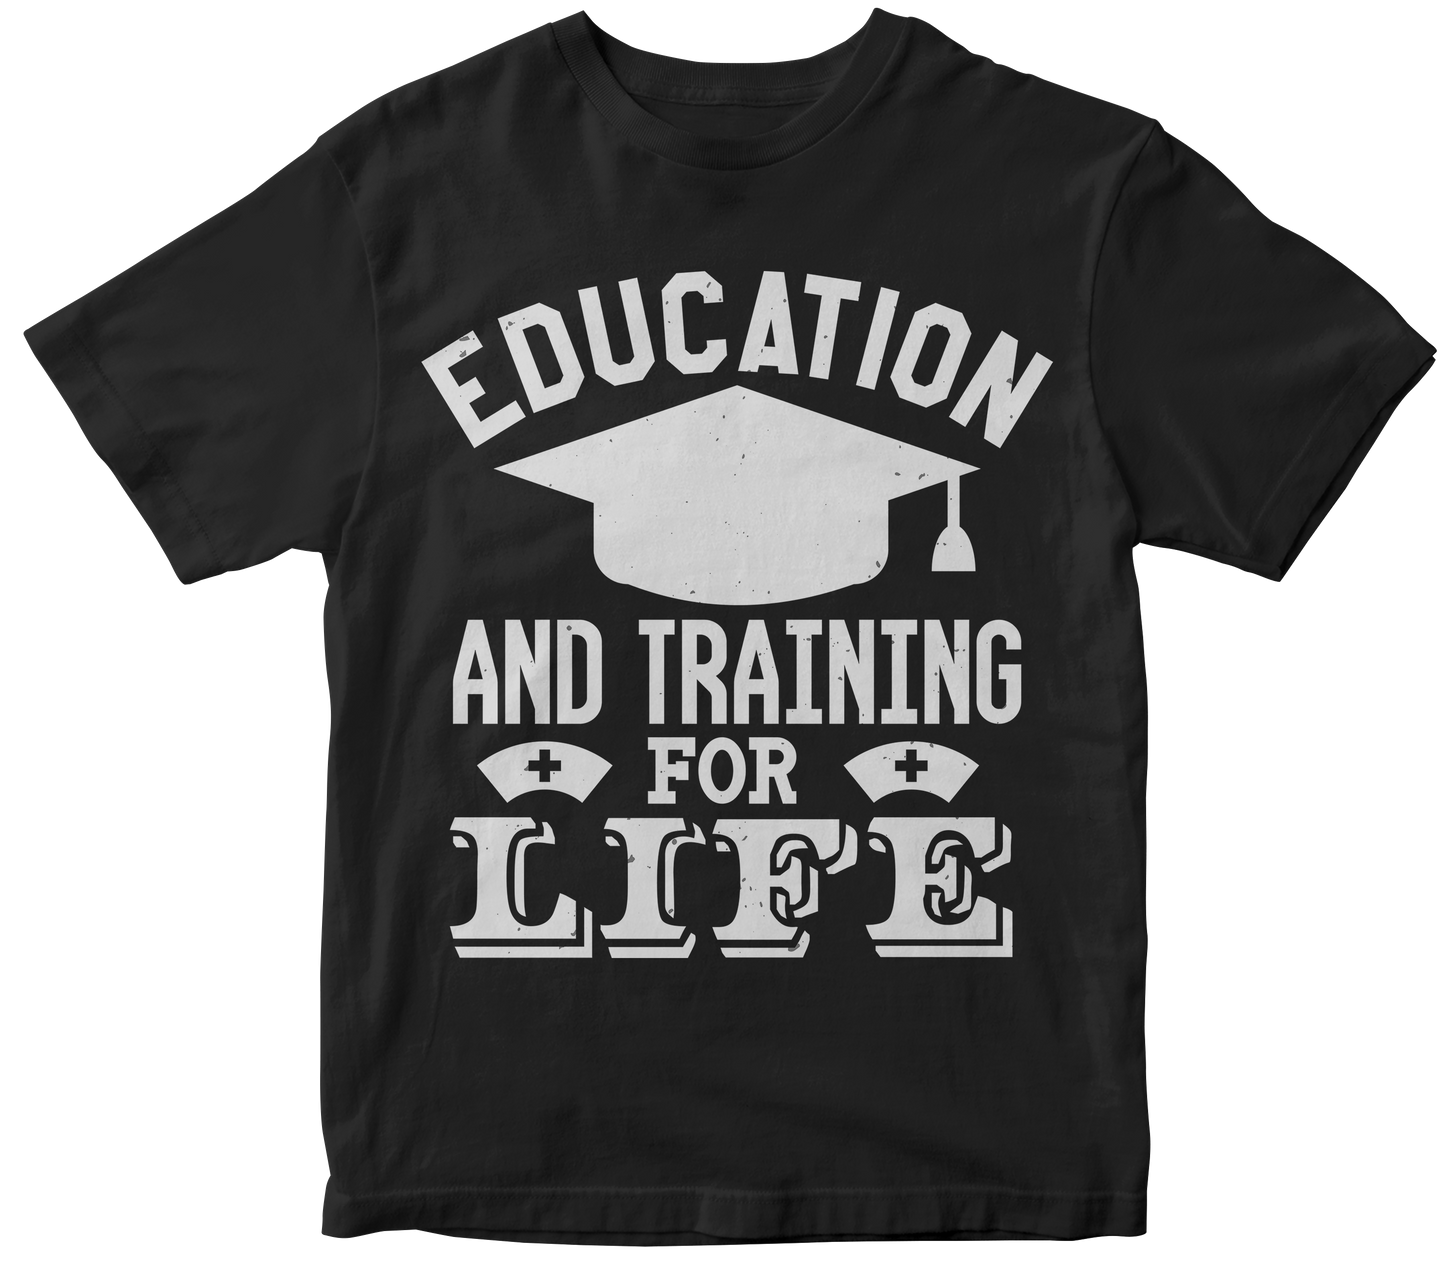 Education and Training for life